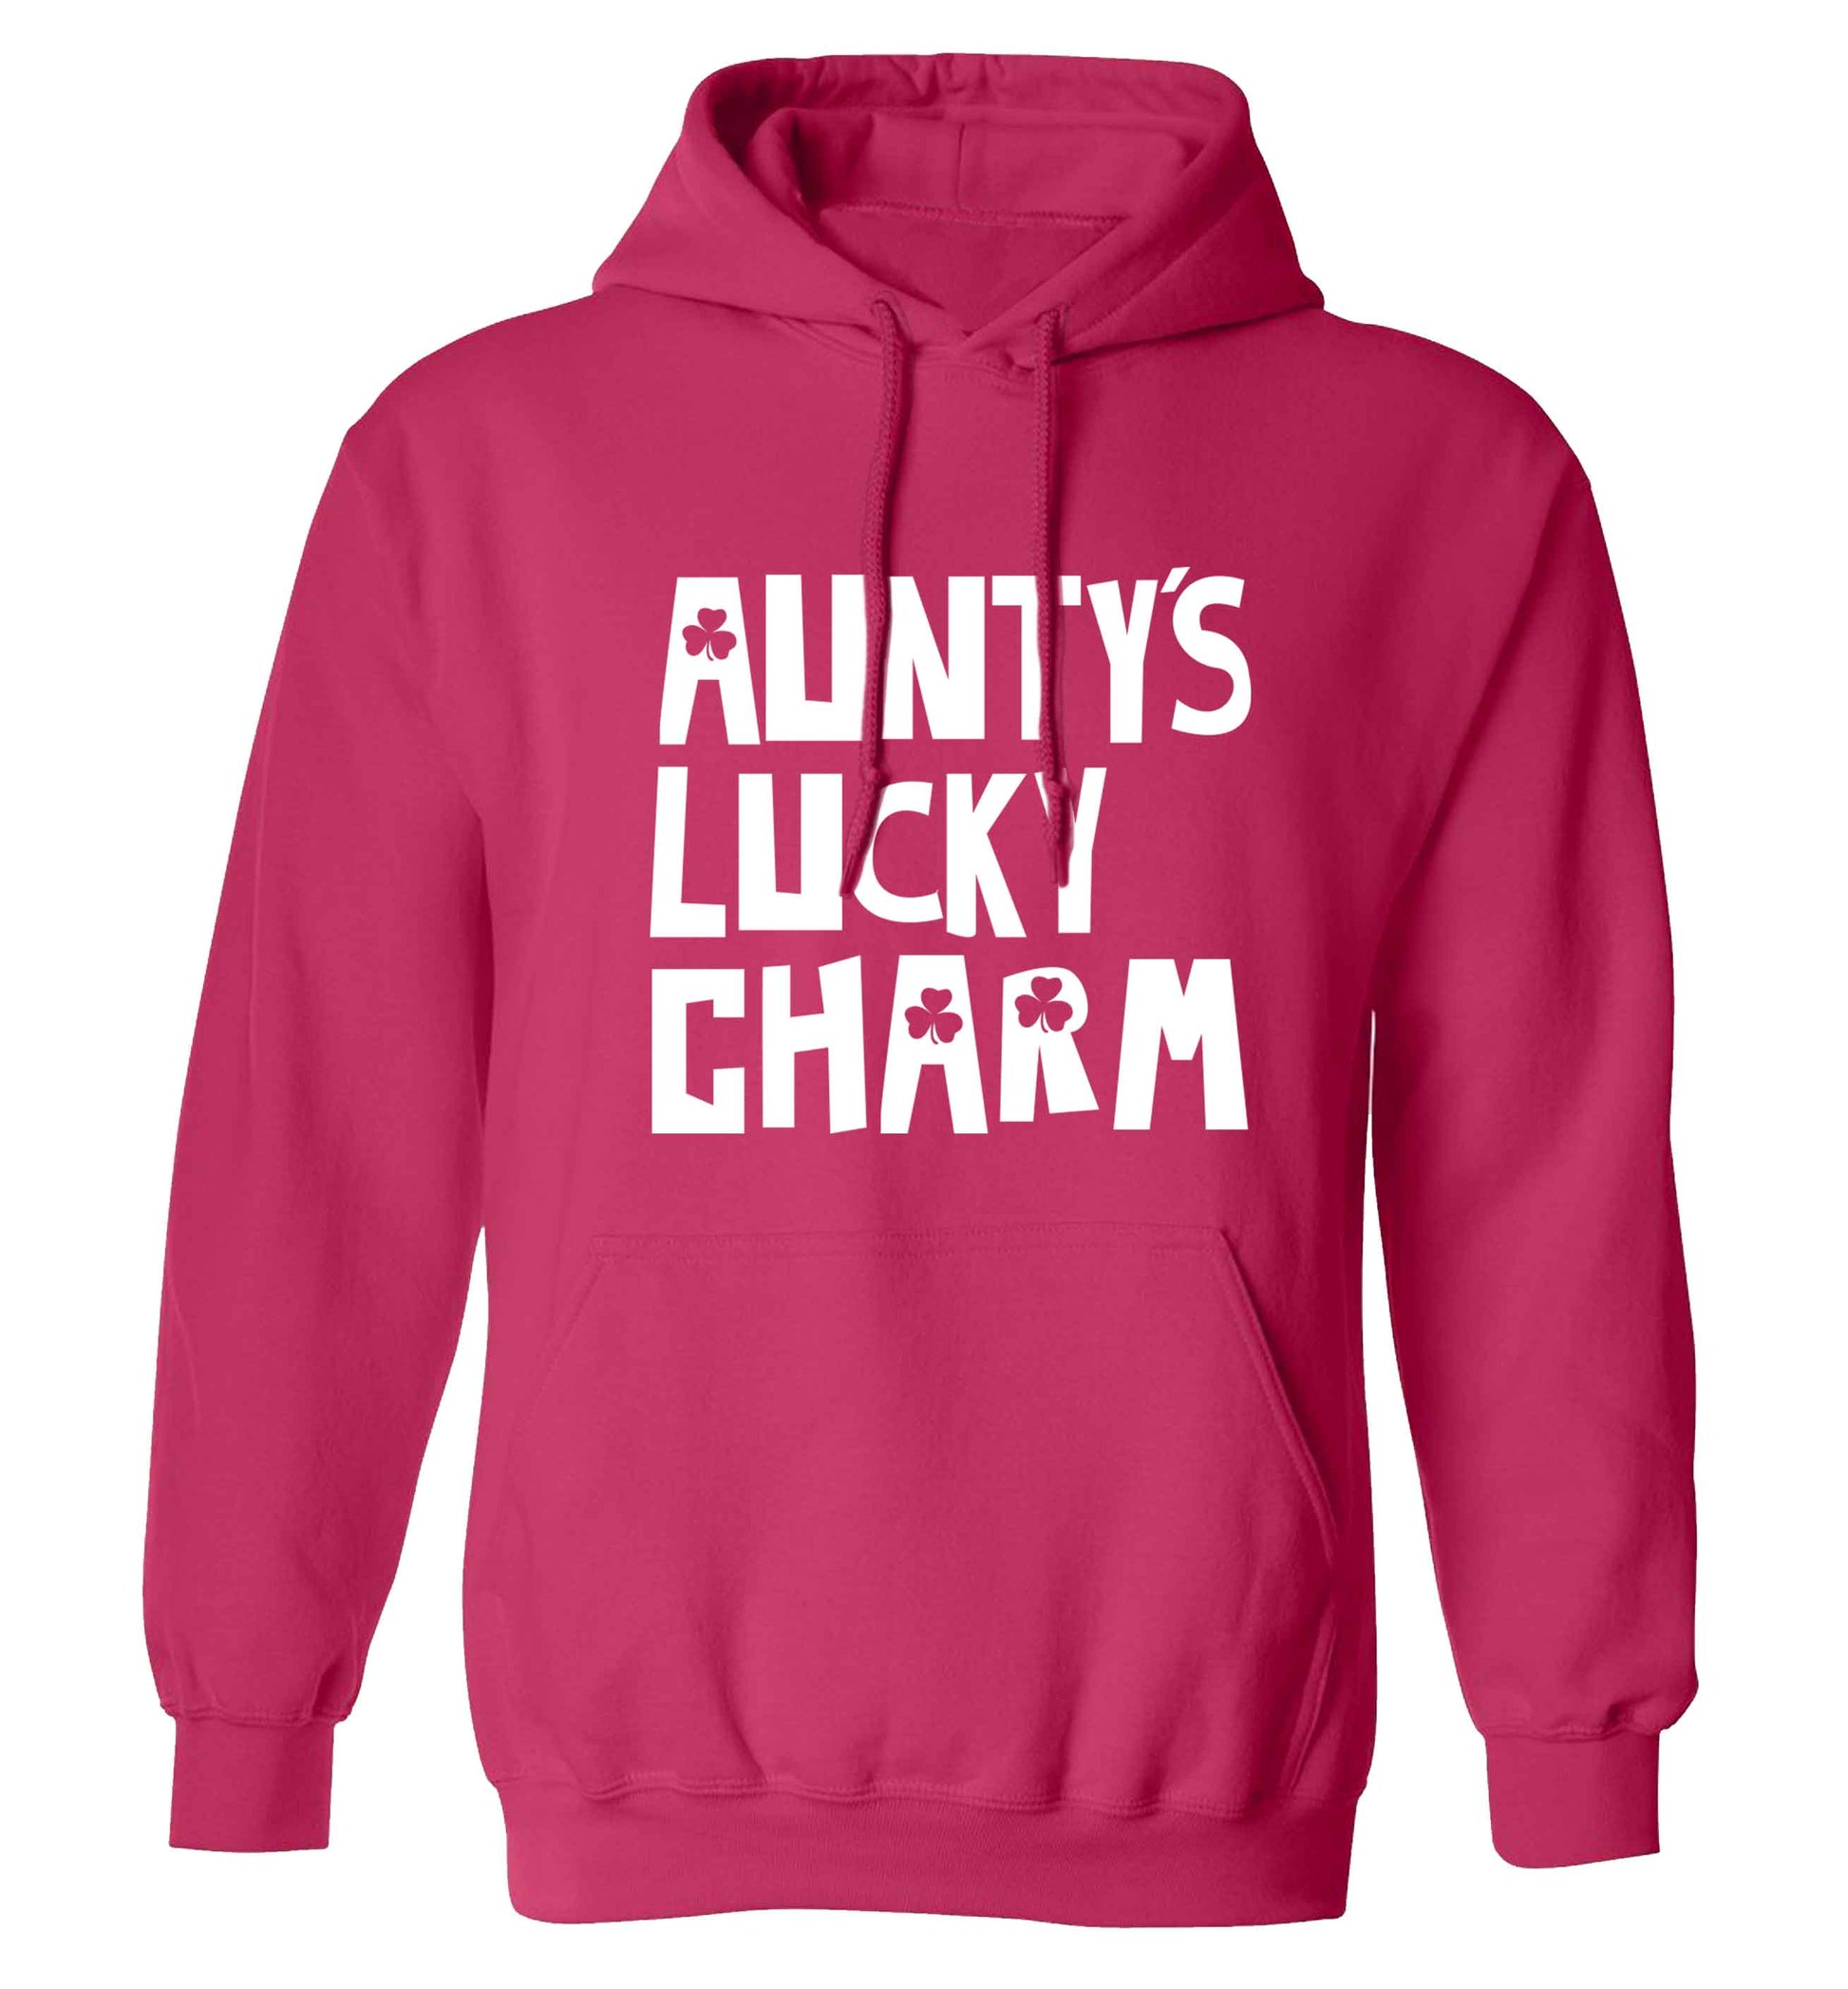 Aunty's lucky charm adults unisex pink hoodie 2XL